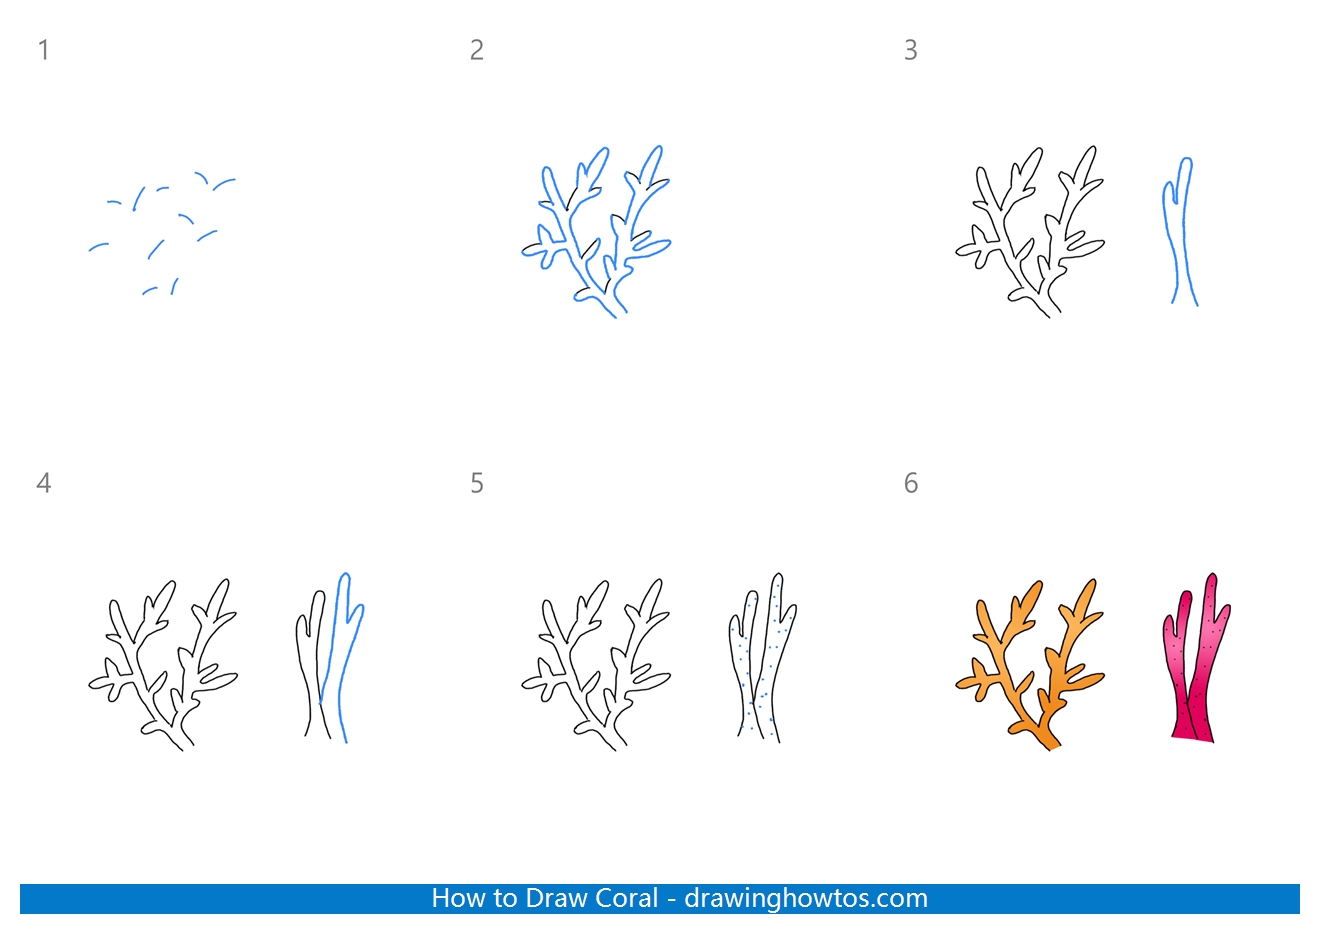 How to Draw Coral Reefs Step by Step